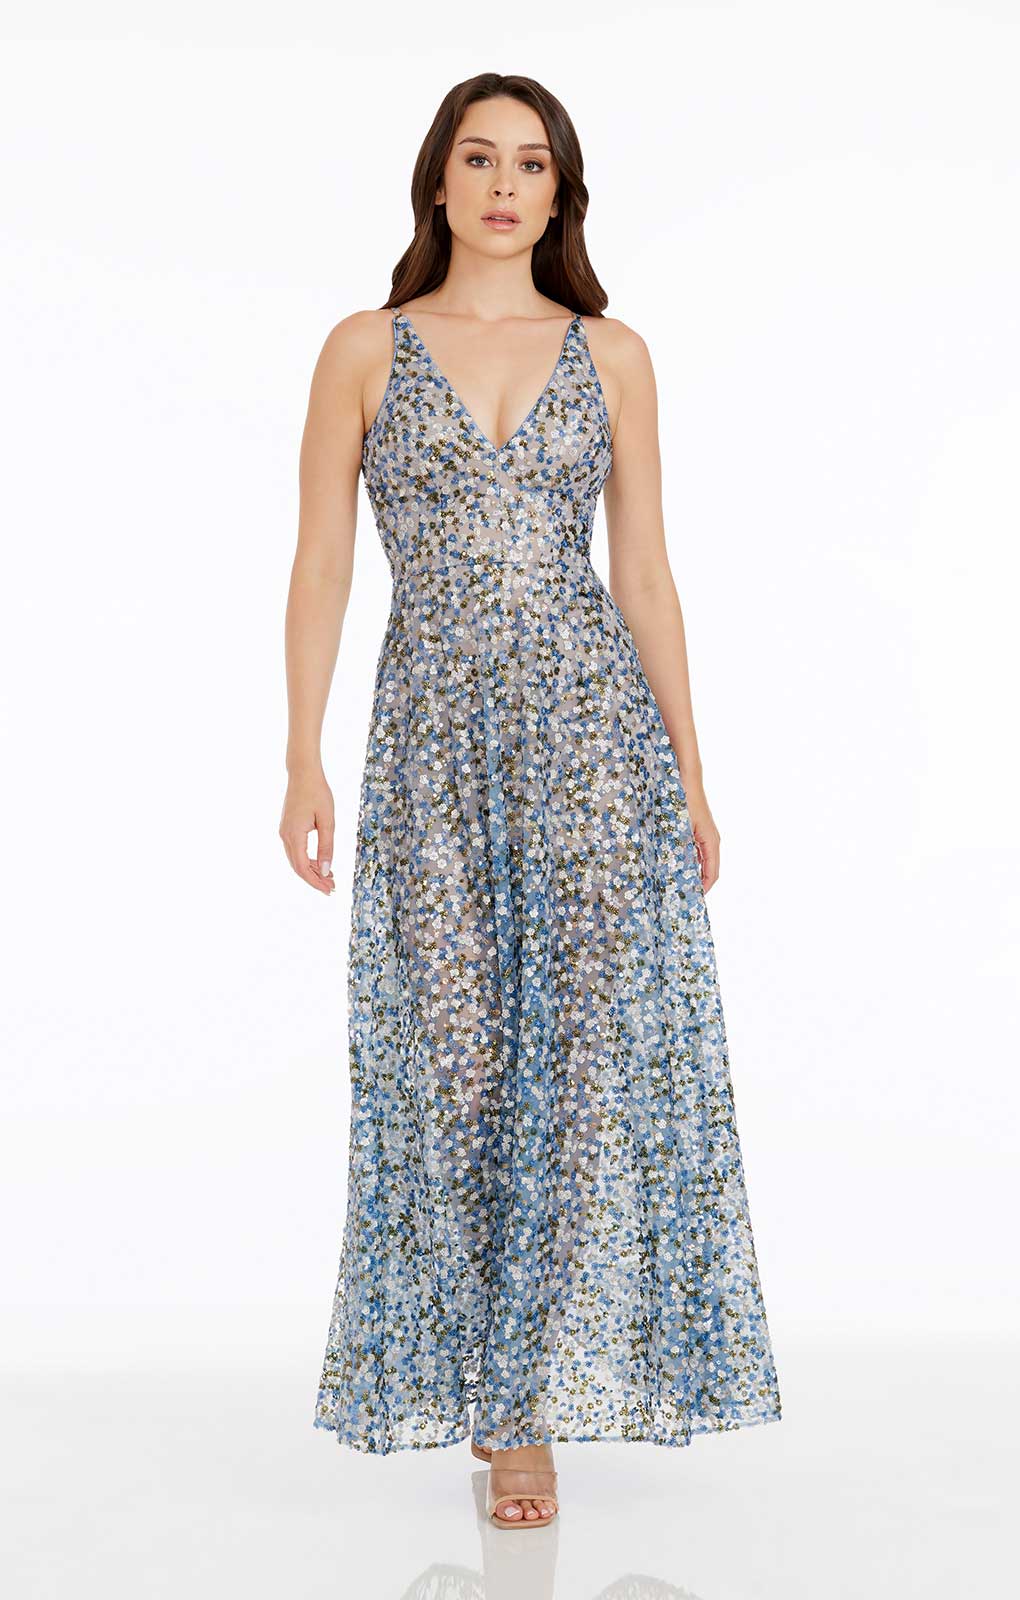 Dress The Population Ariyah Mineral Blue Floral Maxi Dress product image